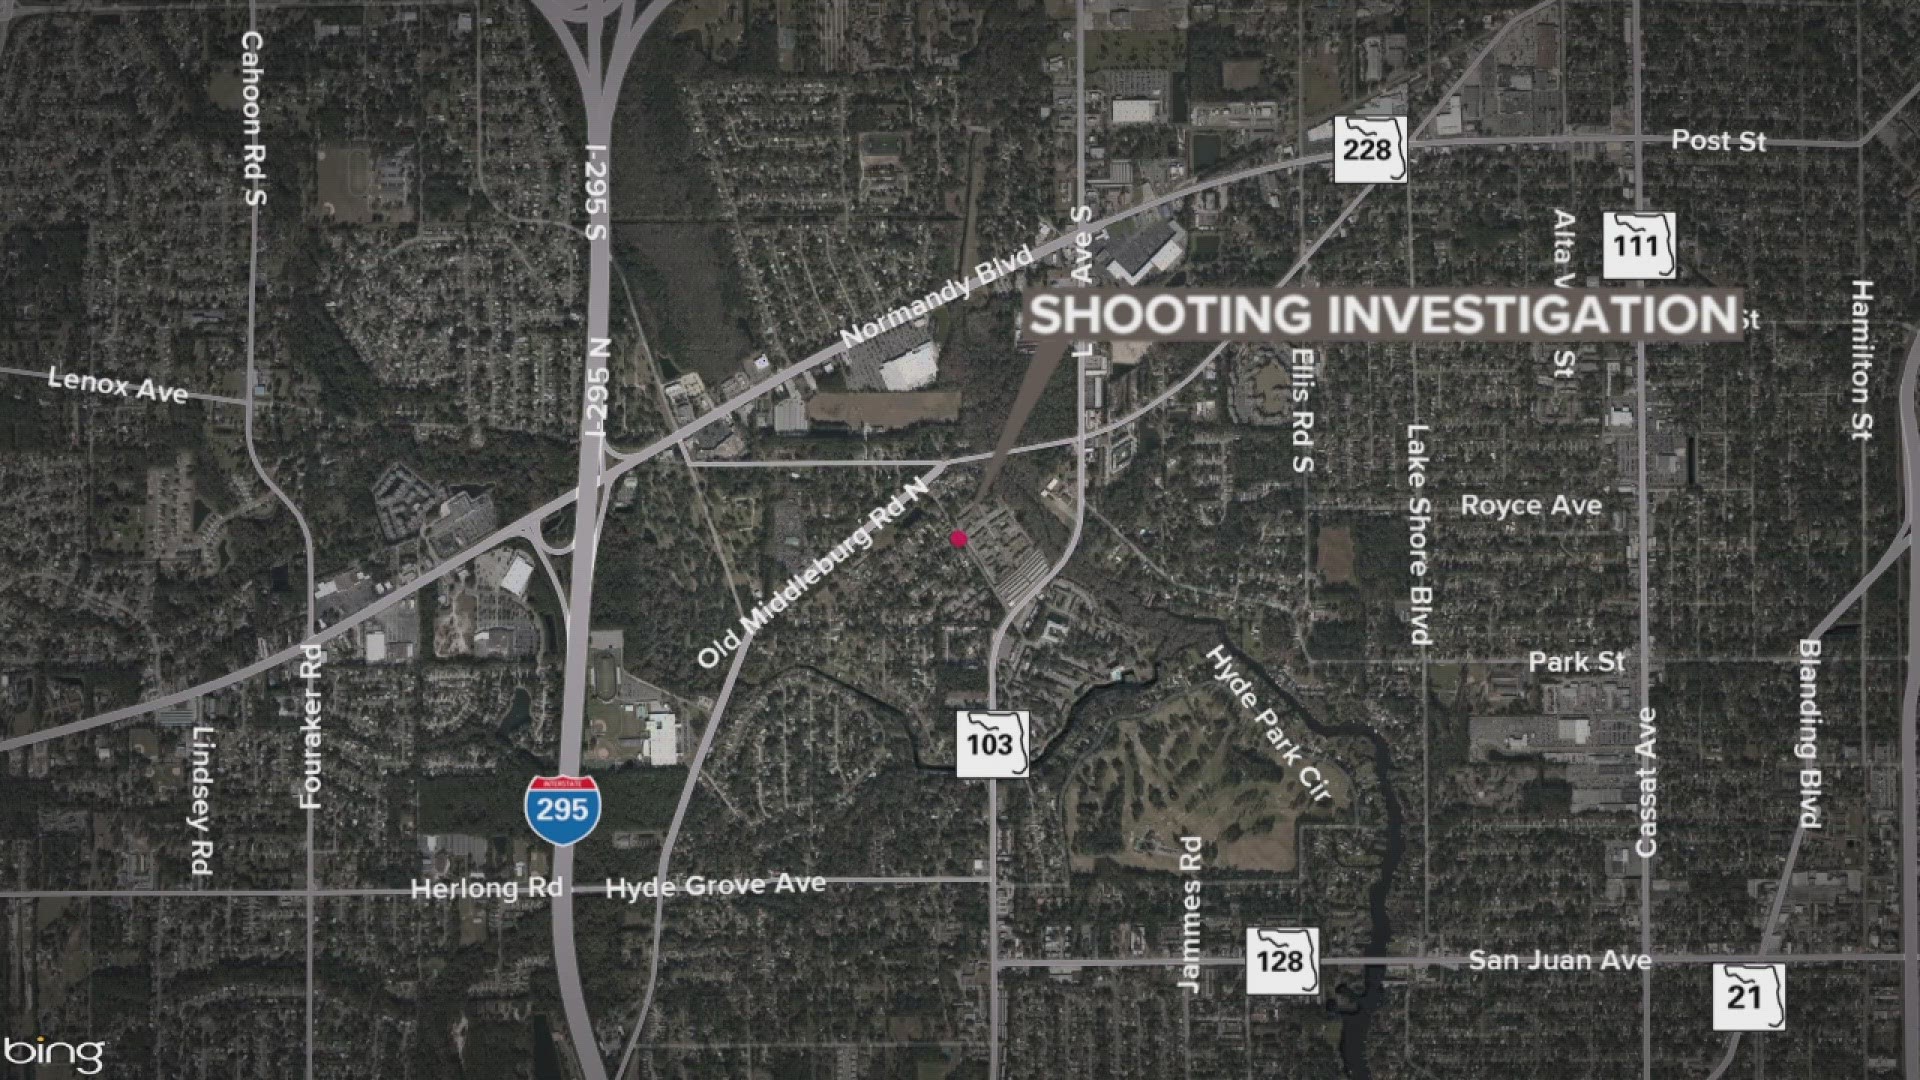 The Jacksonville Sheriff's Office says a man was sitting in a vehicle when he was approached by multiple men. One of them opened fire, striking the man in his back.